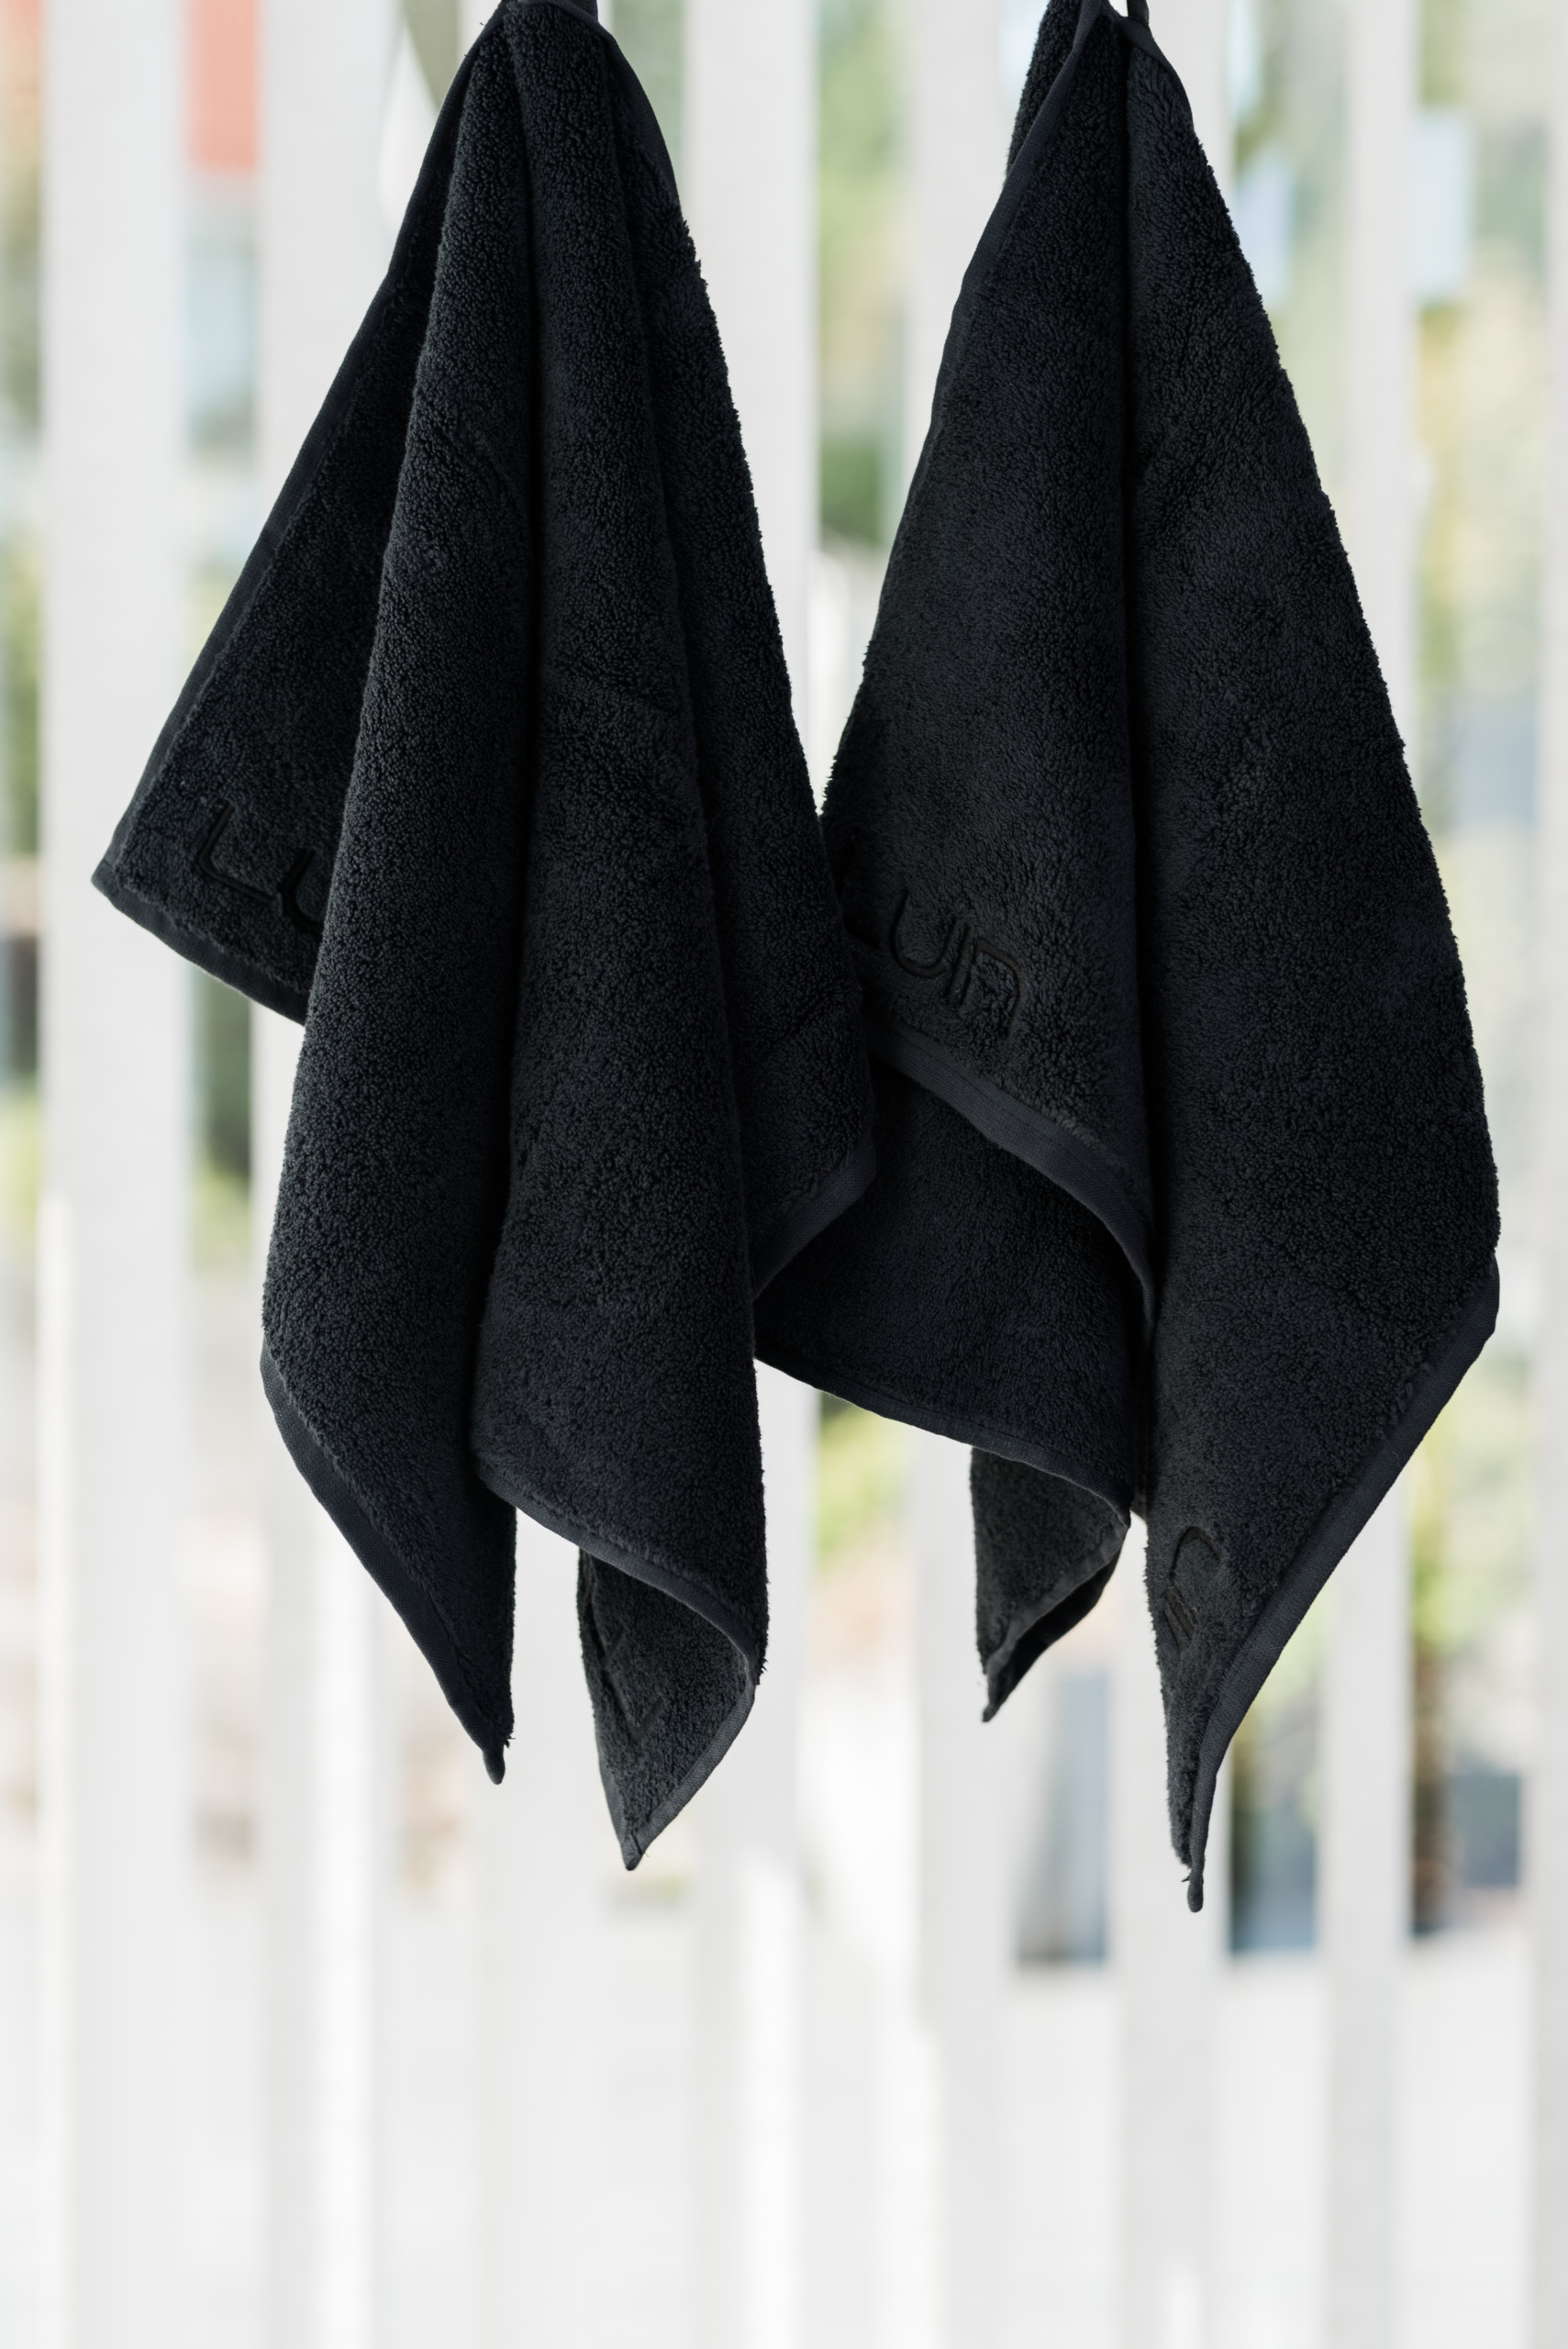 https://www.luinliving.com/wp-content/uploads/2021/10/Luin-Living-Hand-Towels-Black-4-scaled.jpg